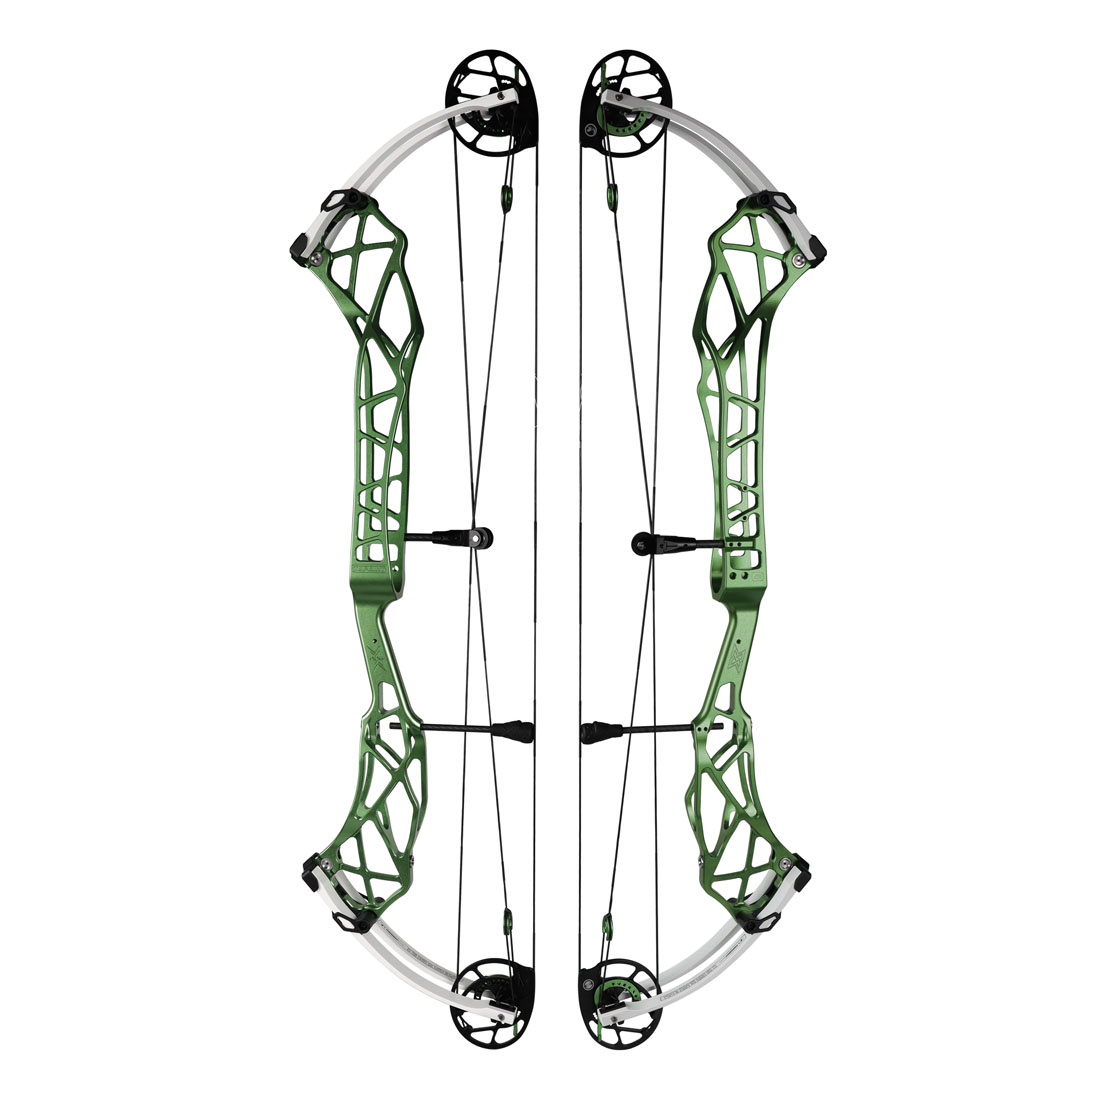 Topoint X40 Compound Bow